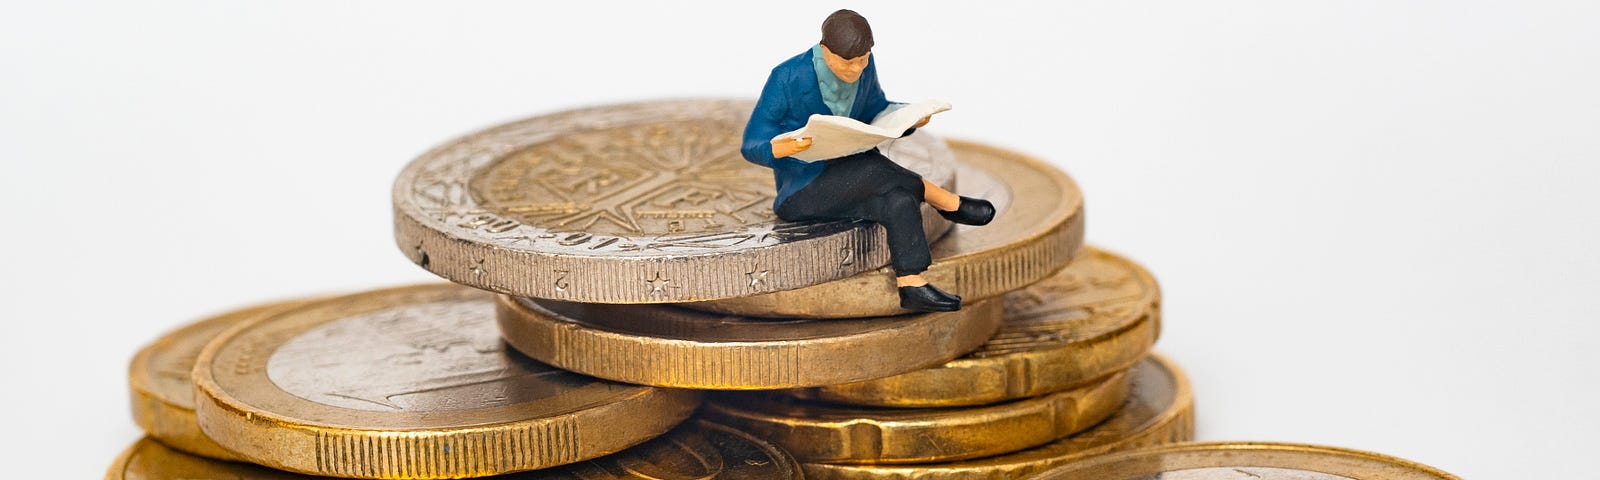 A toy of a man reading a book on a stack of coins